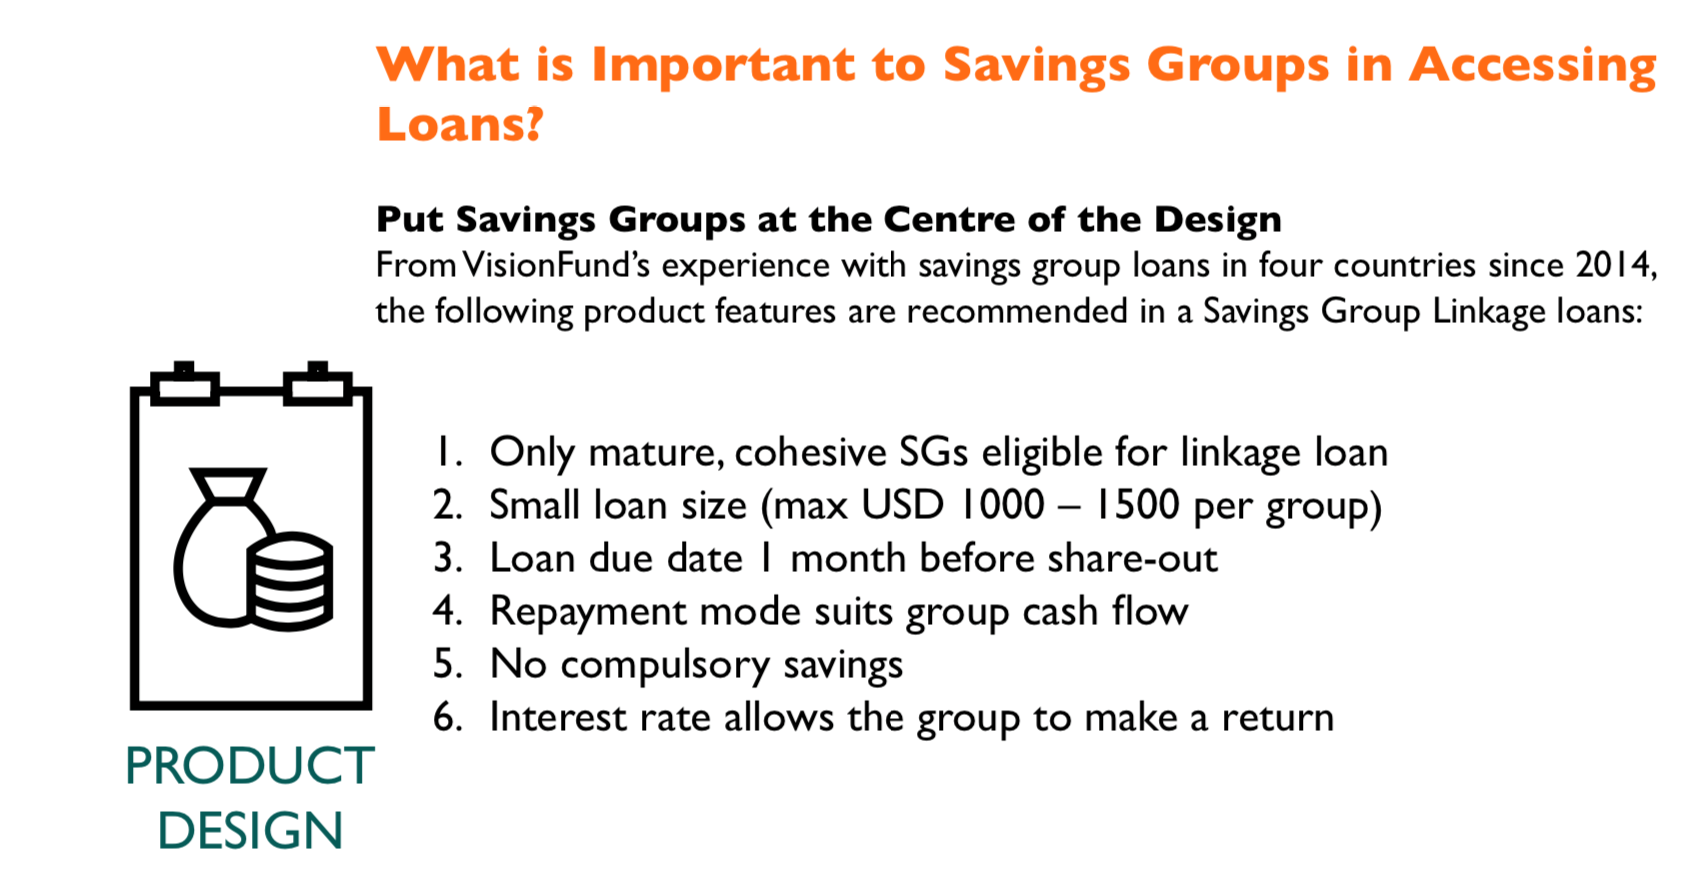 What is important to SG groups when accessing loans? 